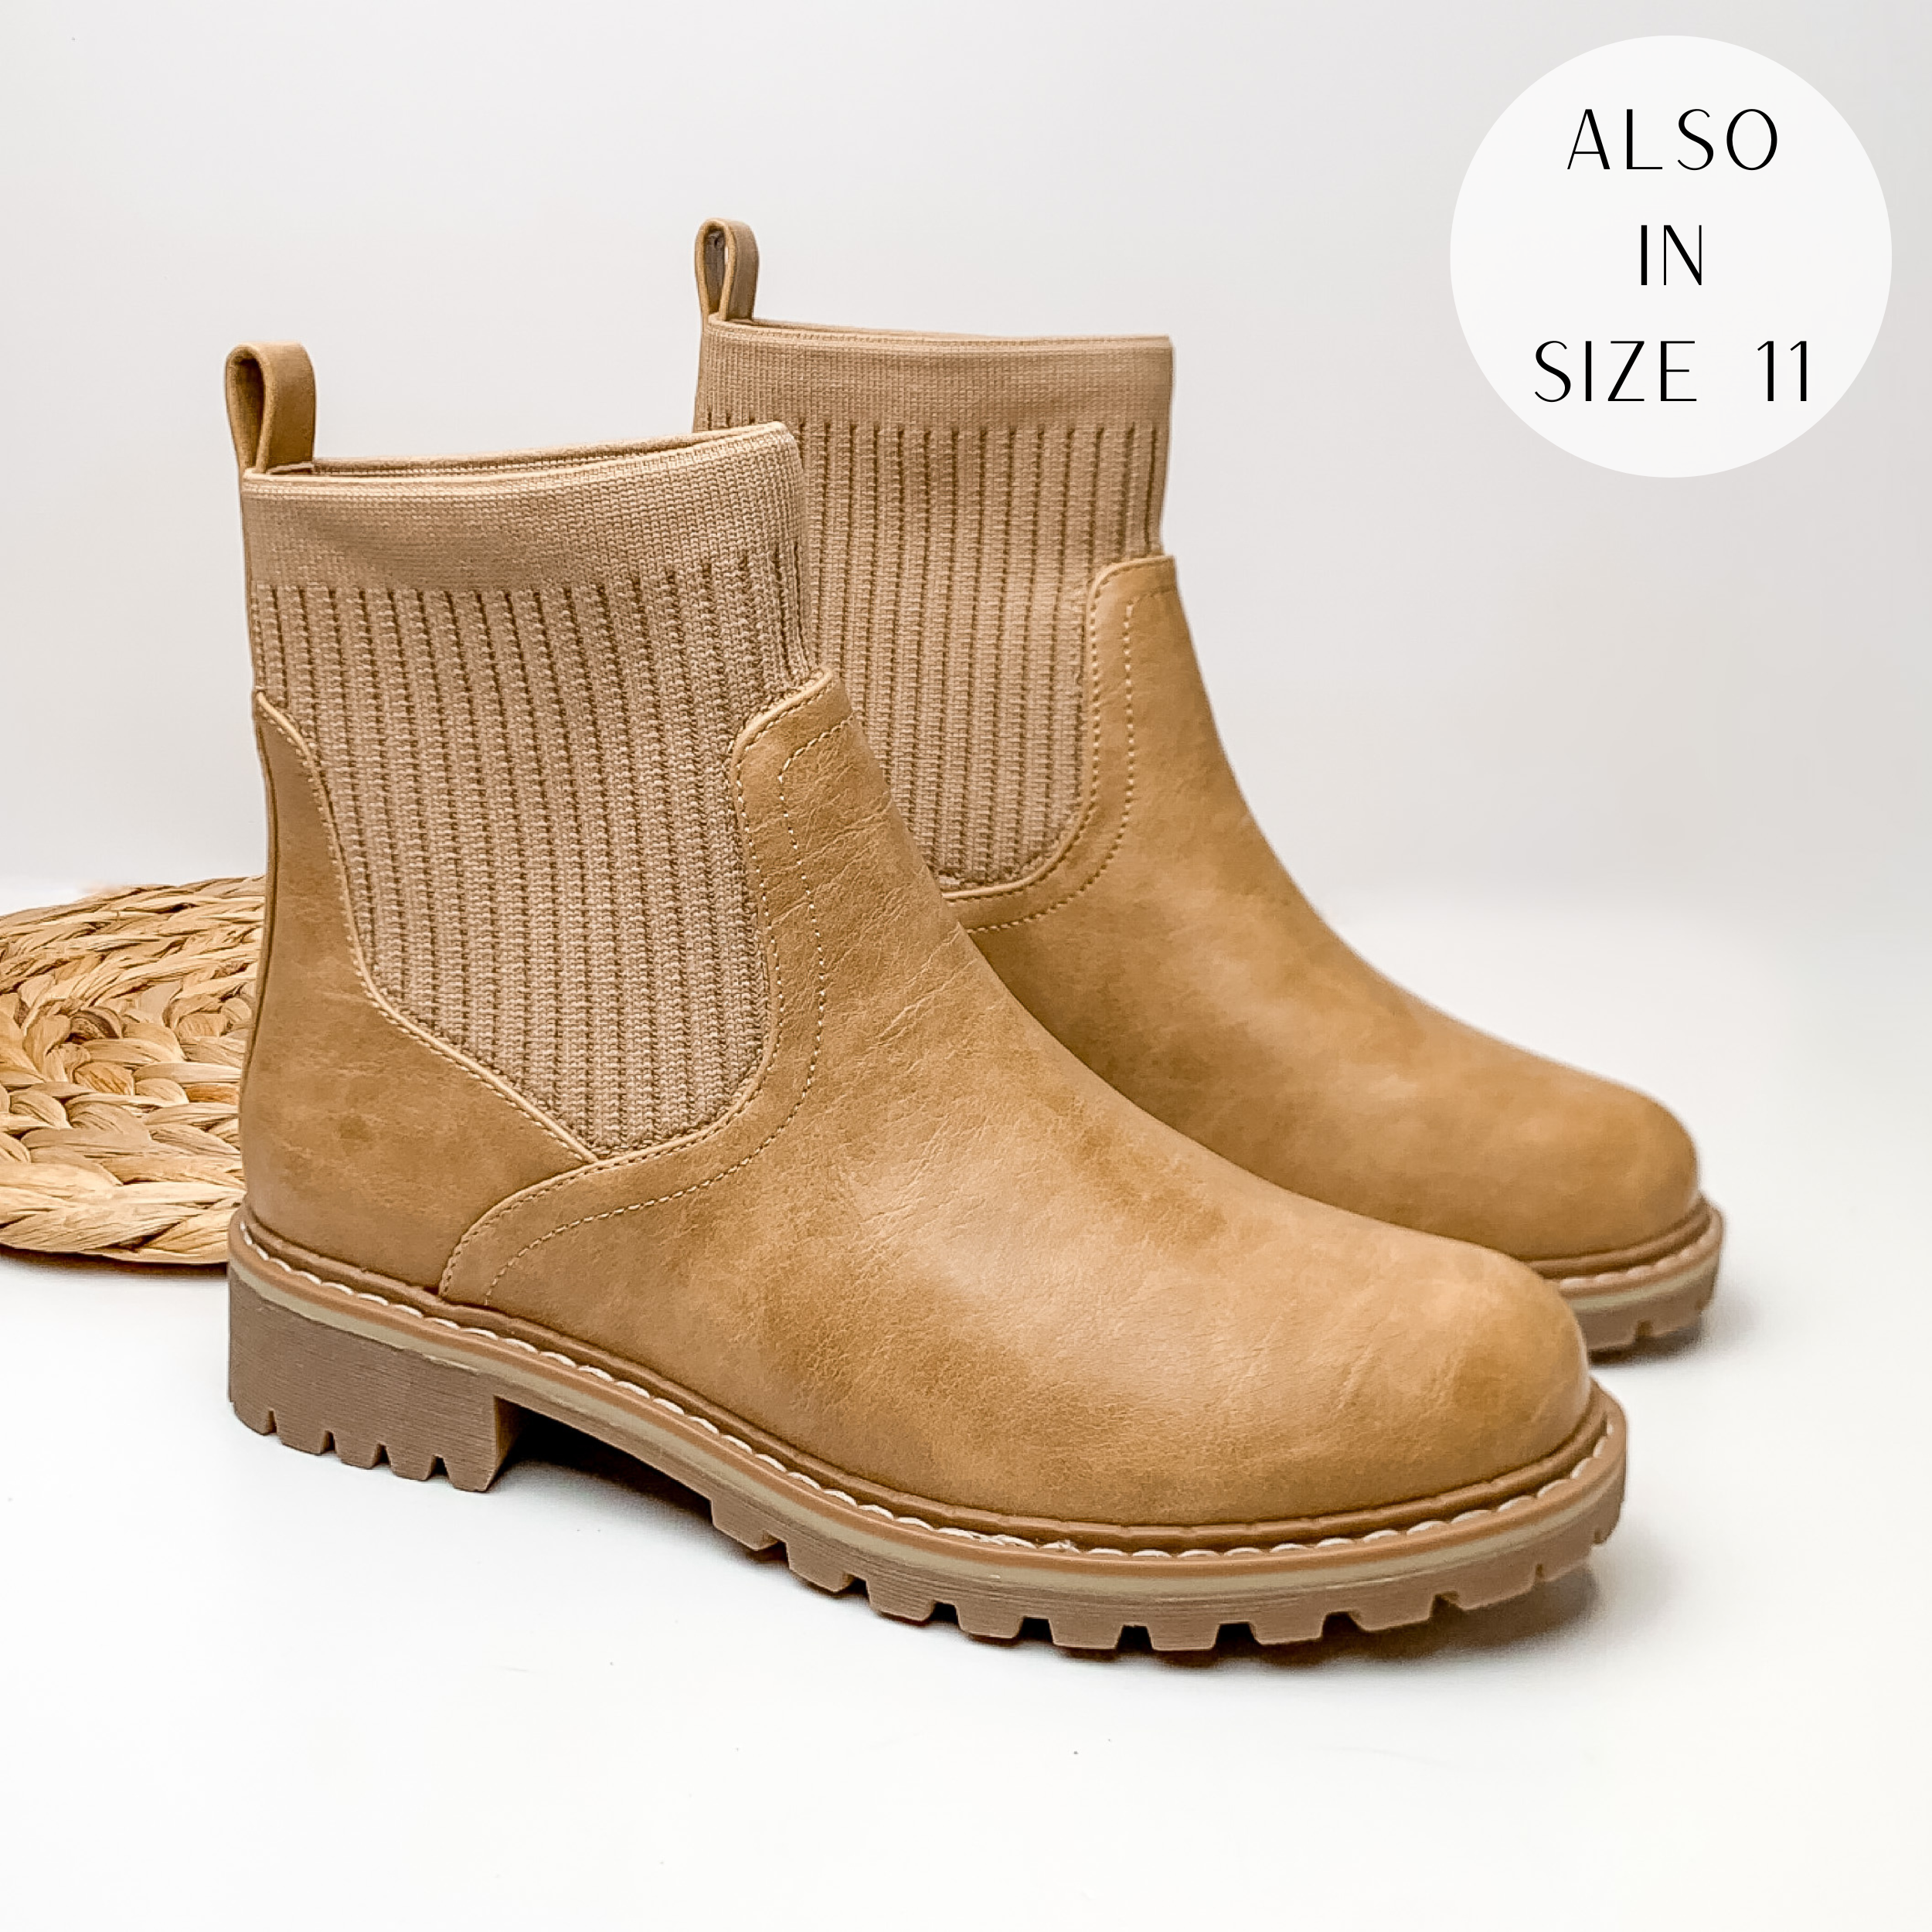 Slip on booties in tan with a tan, rubber sole. These boots are pictured on a white background.